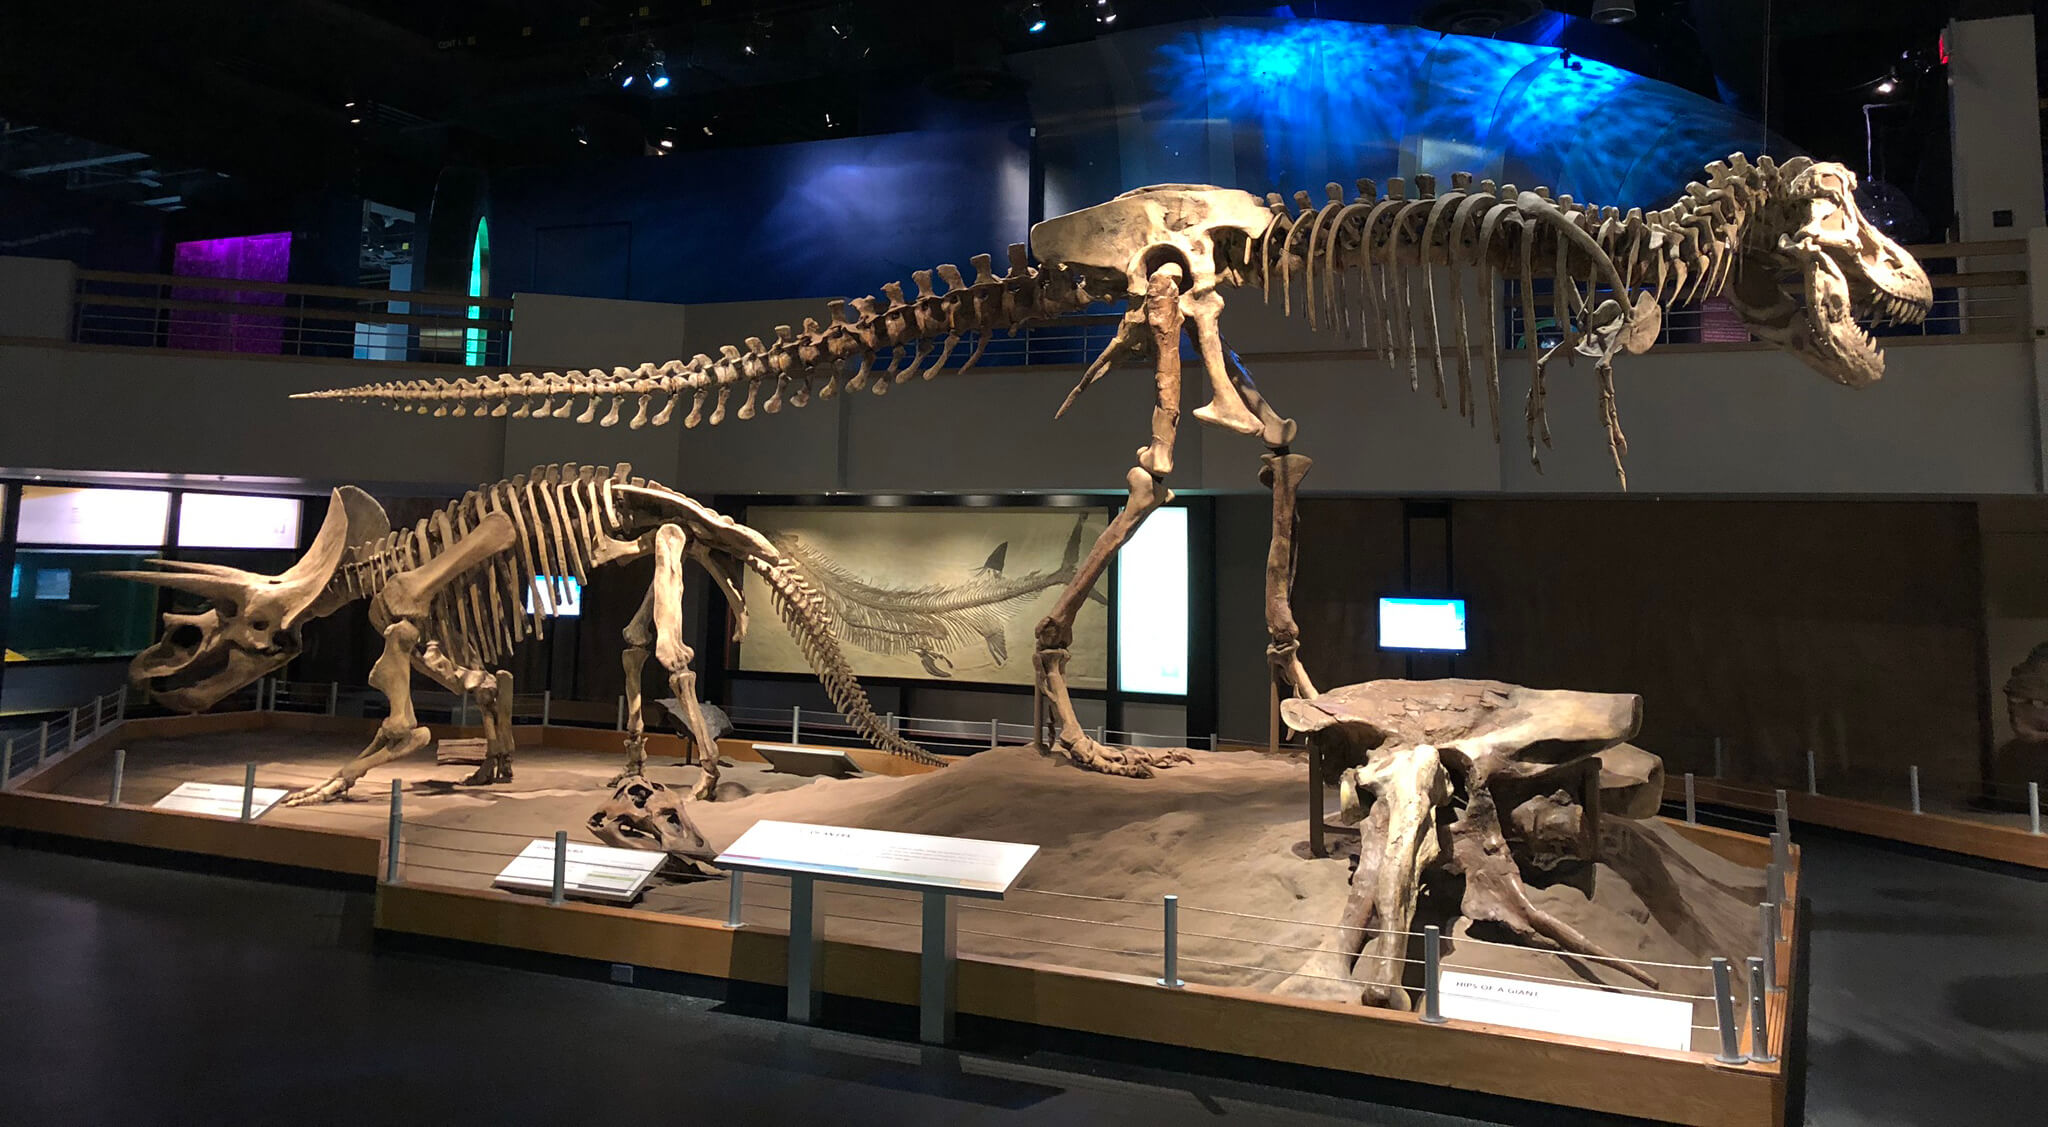 The Royal Tyrrell Museum of Paleontology